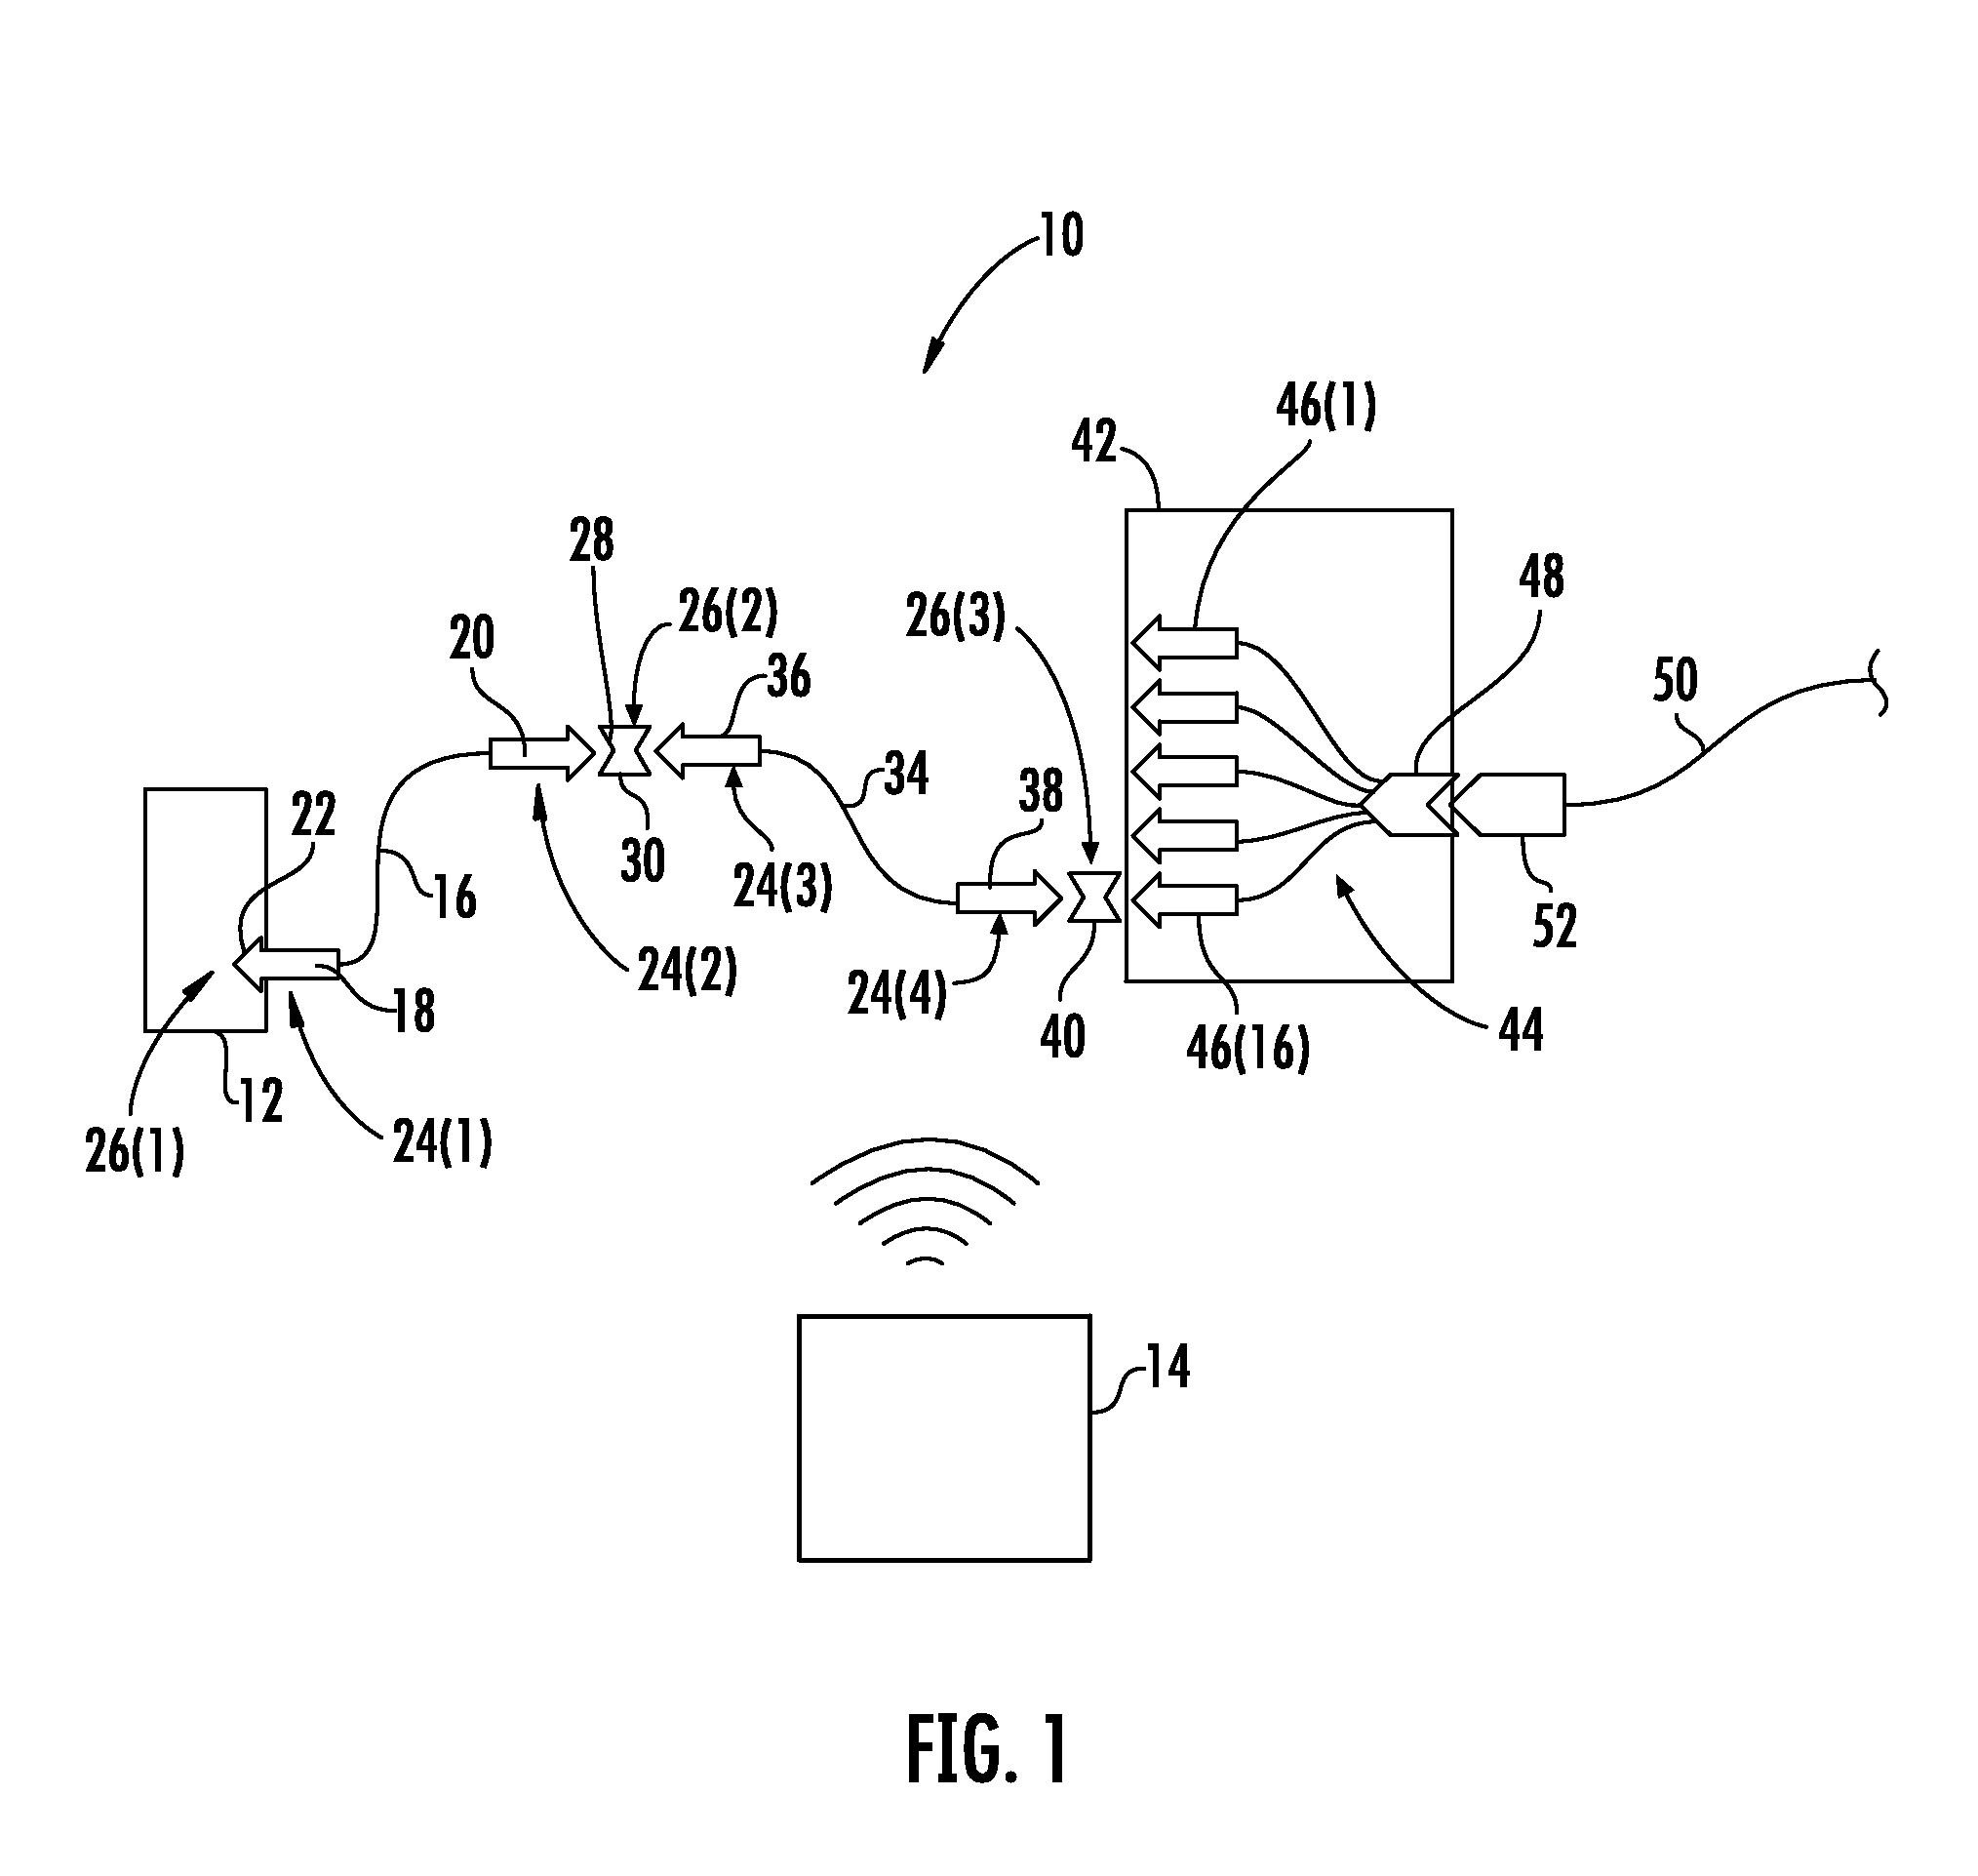 Radio frequency identification (RFID) in communication connections, including fiber optic components